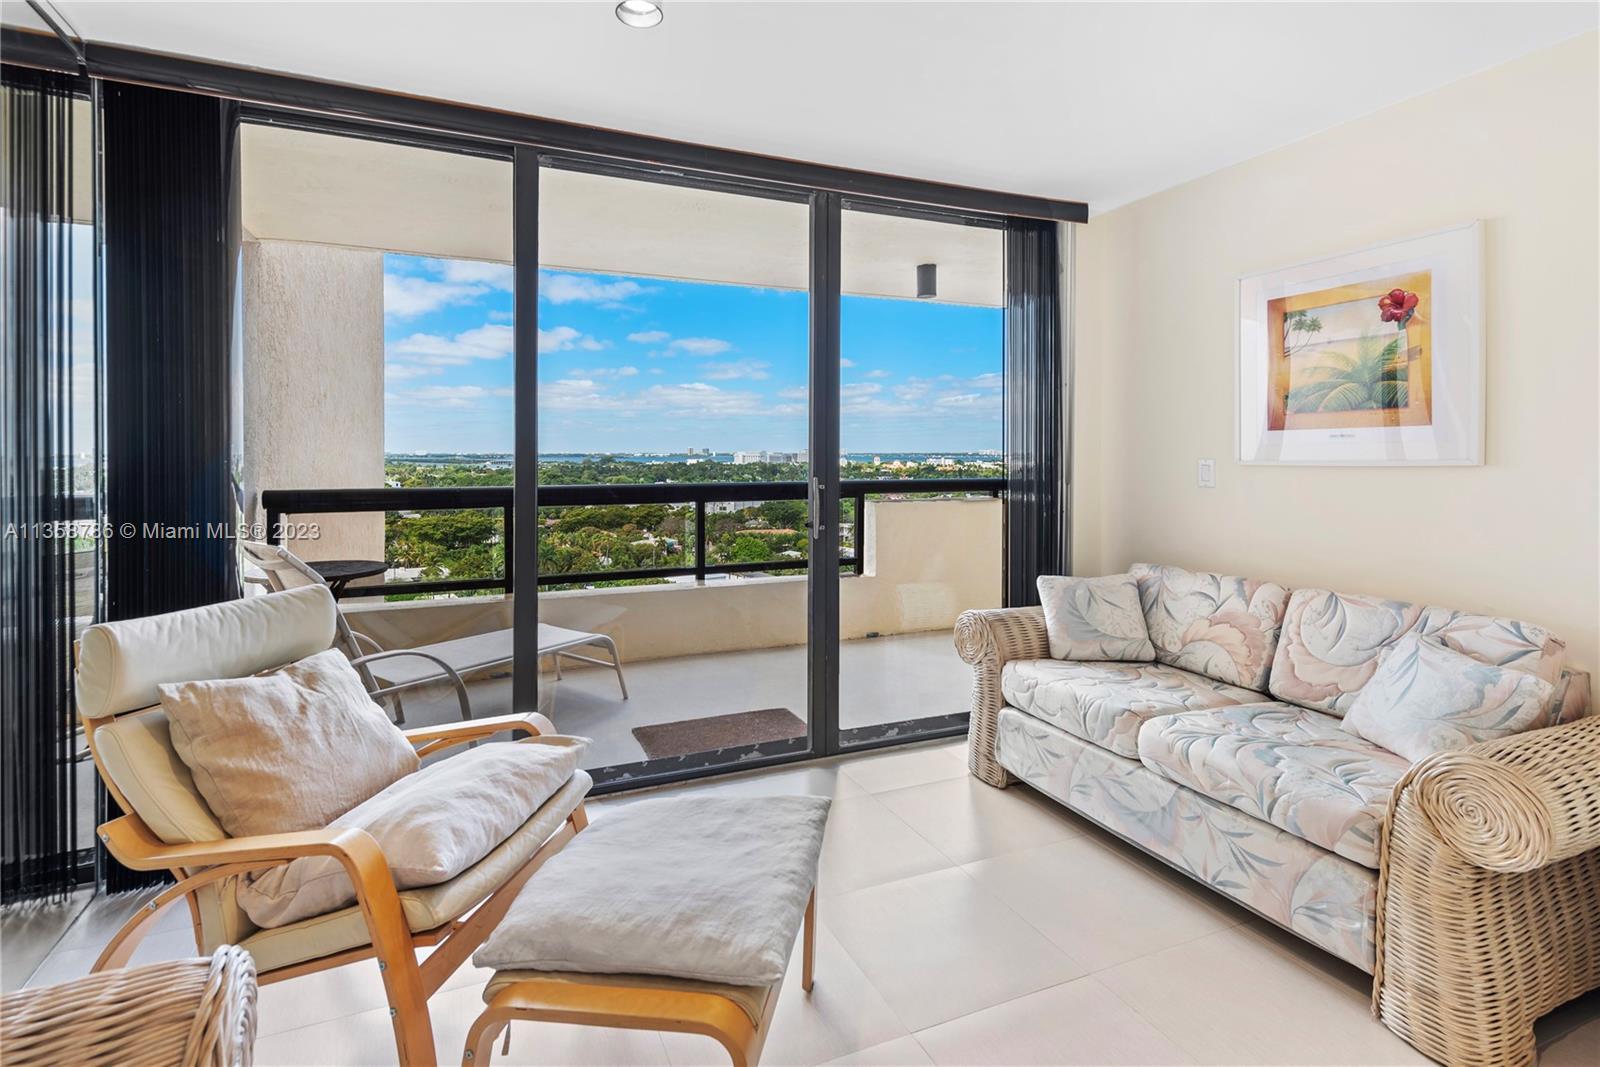 Great completely furnished investment or just living opportunity in a privileged area of Miami Beach